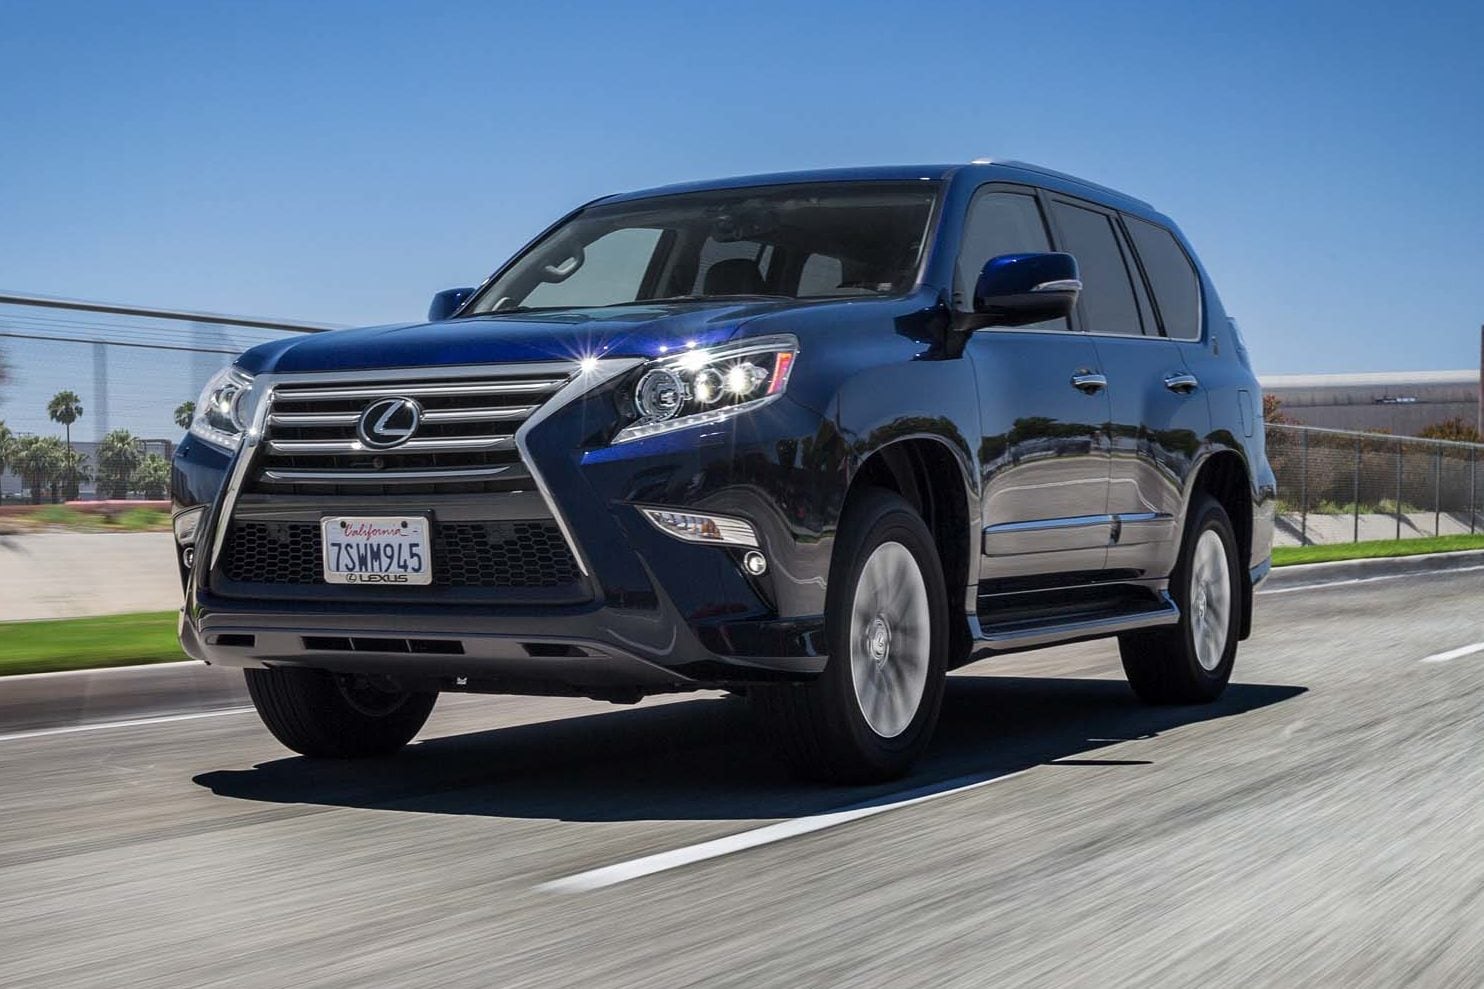 2017 Lexus GX 460 First Test: Posh (and Aging) Off-Roader